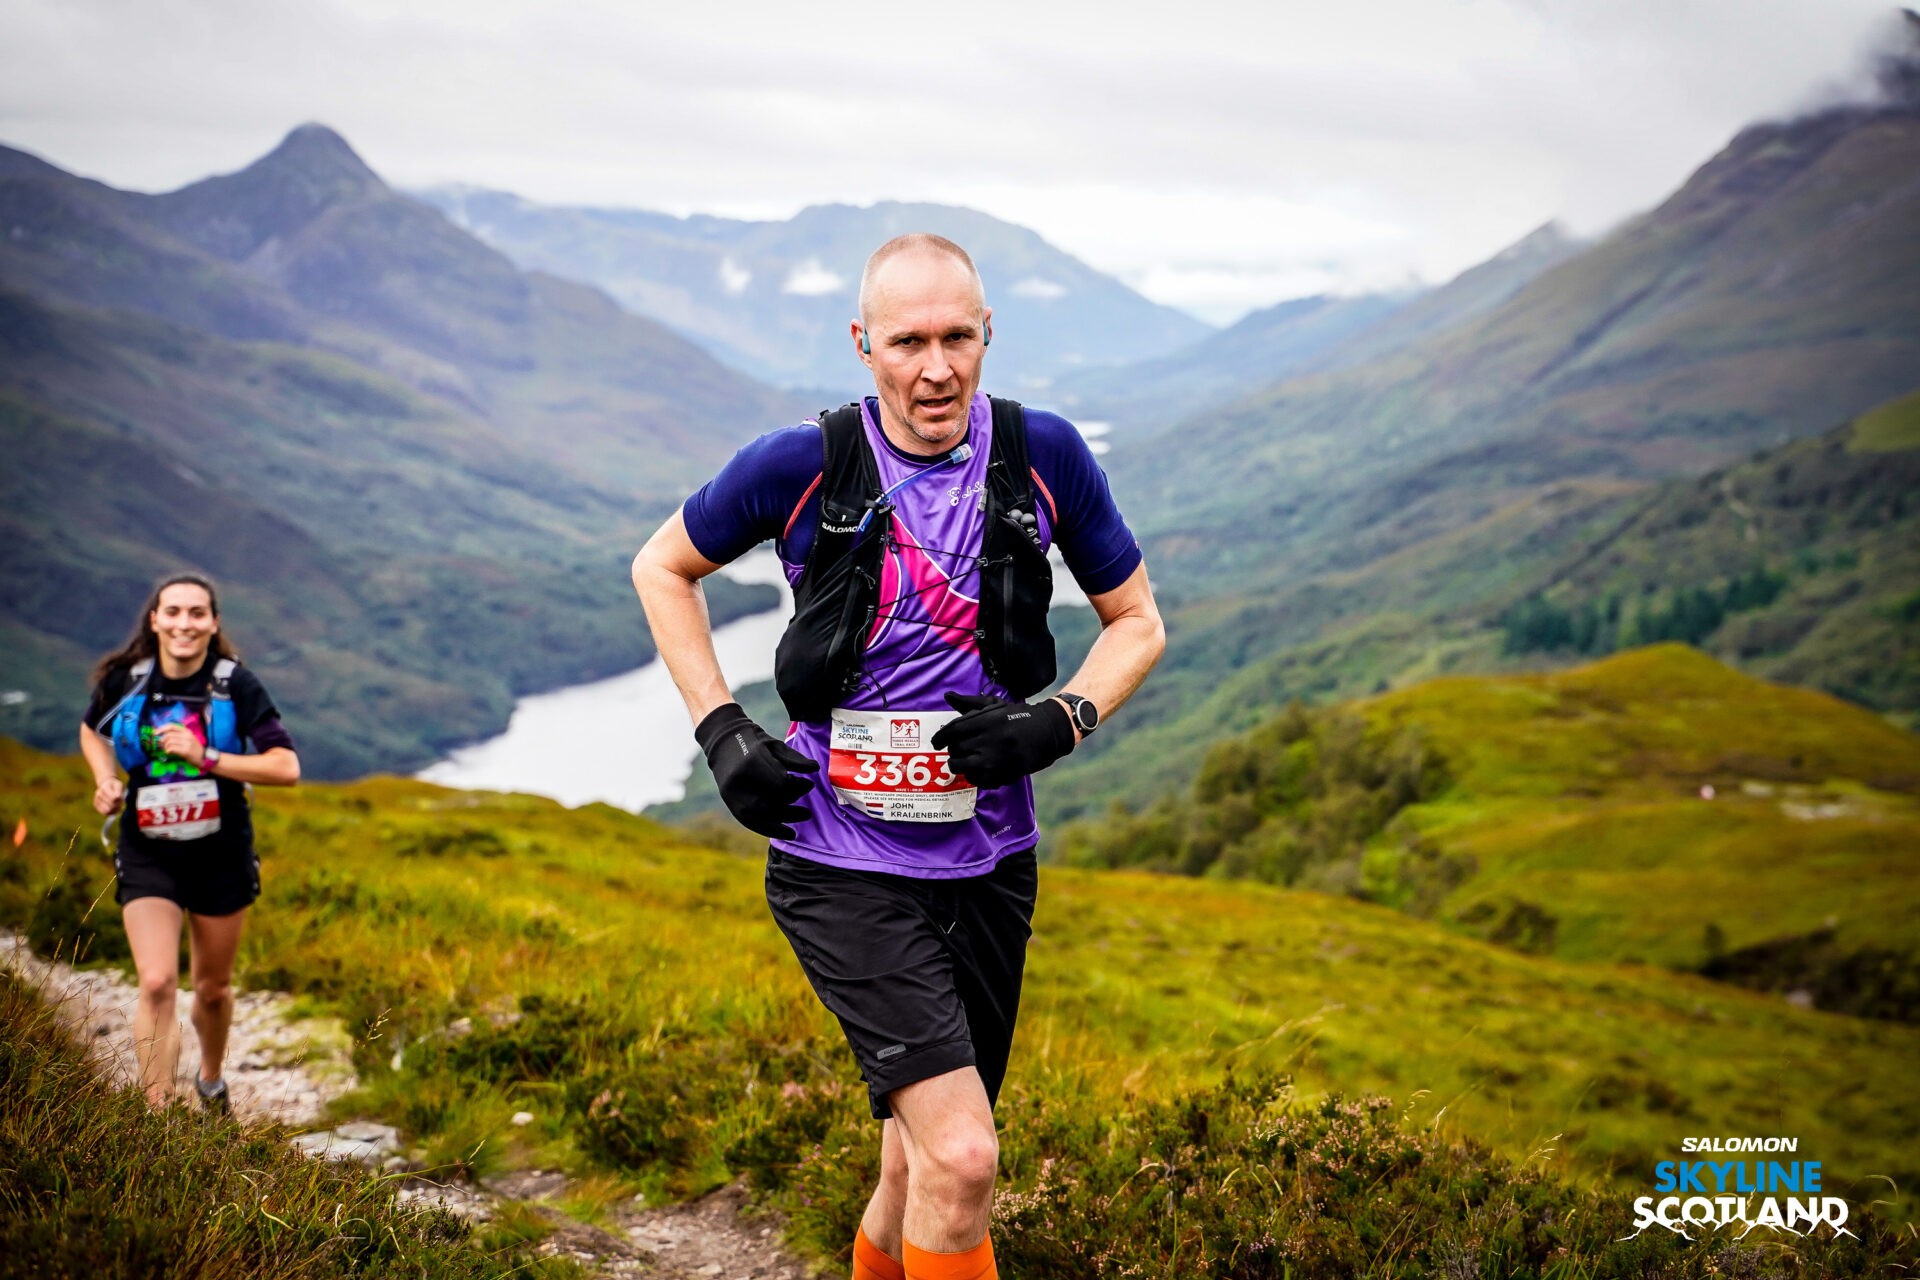 Three Mealls Trail Race at Skyline Scotland is the most brutal race I’ve ever done